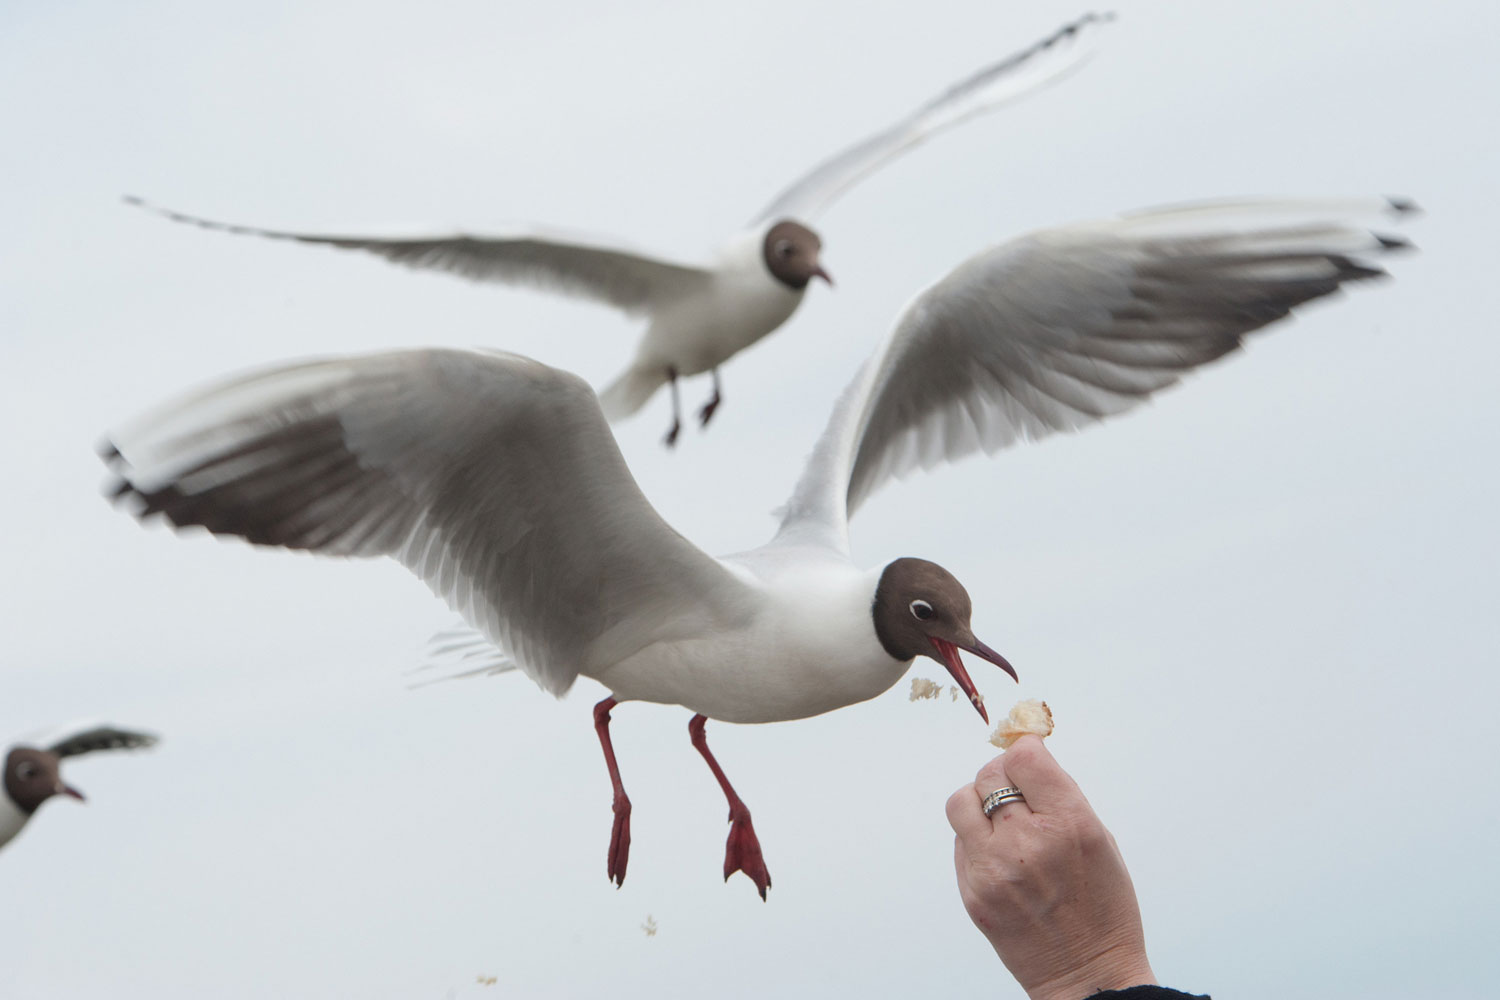 A woman feeds a seagull with breadcrumbs in Zinnowitz on the Baltic island of Usedom, northeastern Germany. Spring brought unsettled weather to the region with temperatures around 20 degrees Celsius.